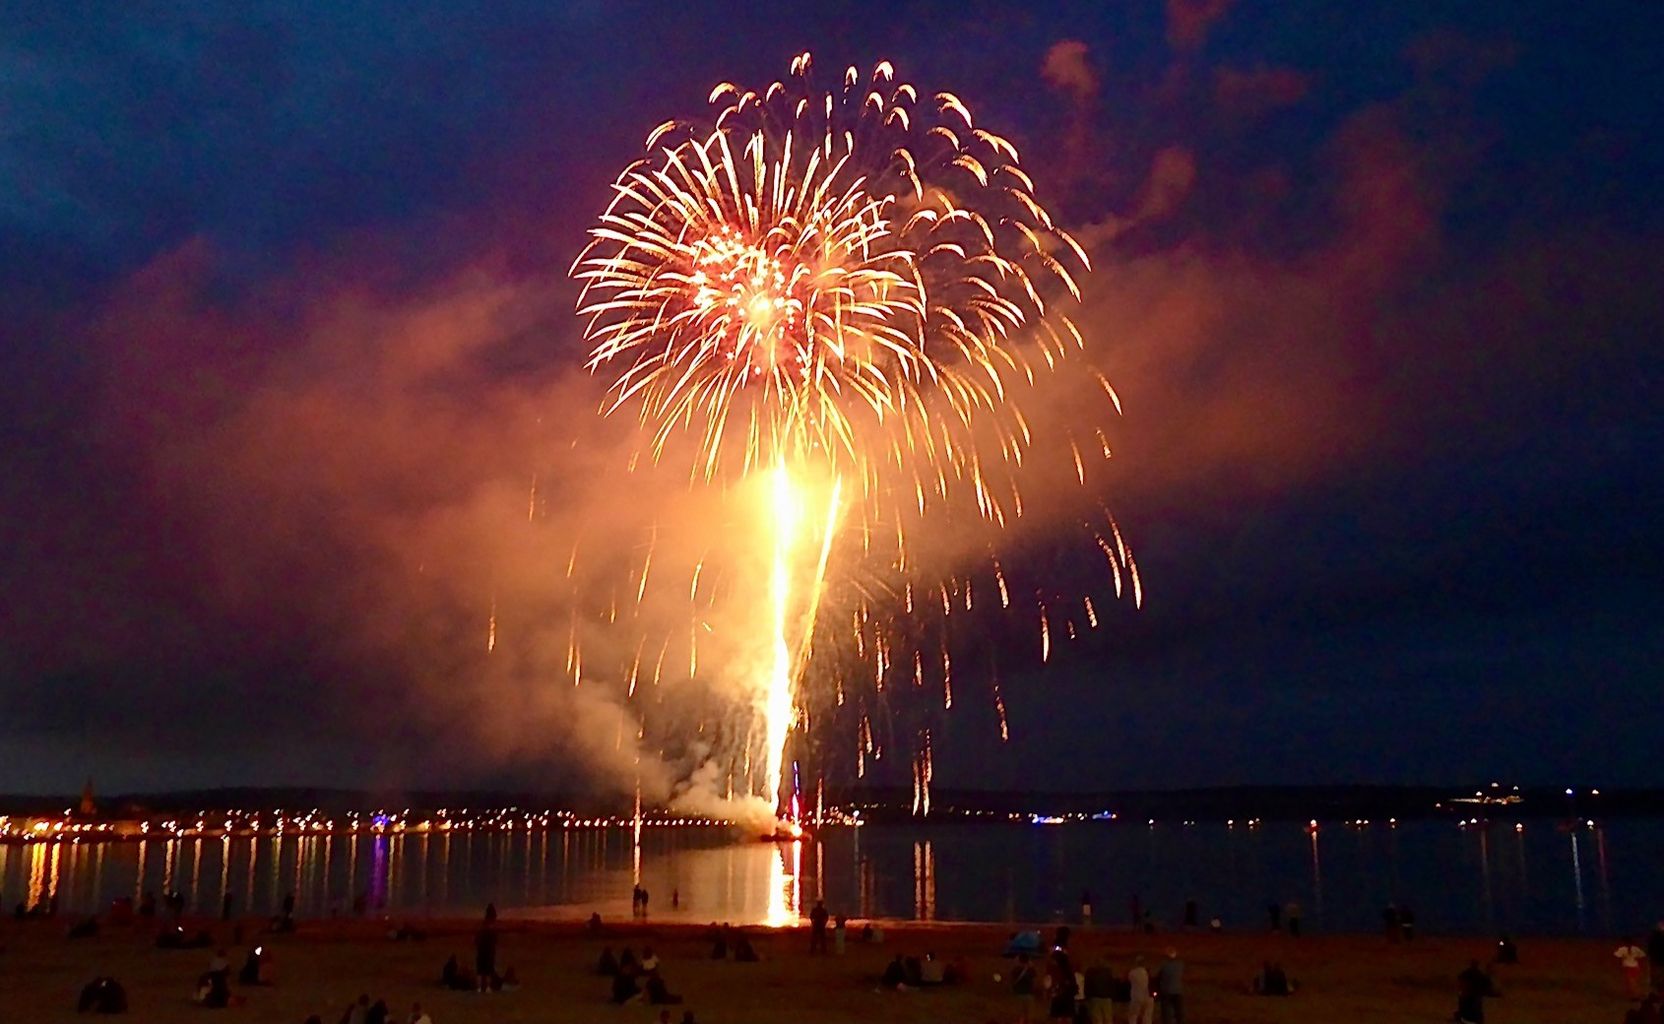 Weymouth to host FREE fireworks spectacular for Queen's Platinum